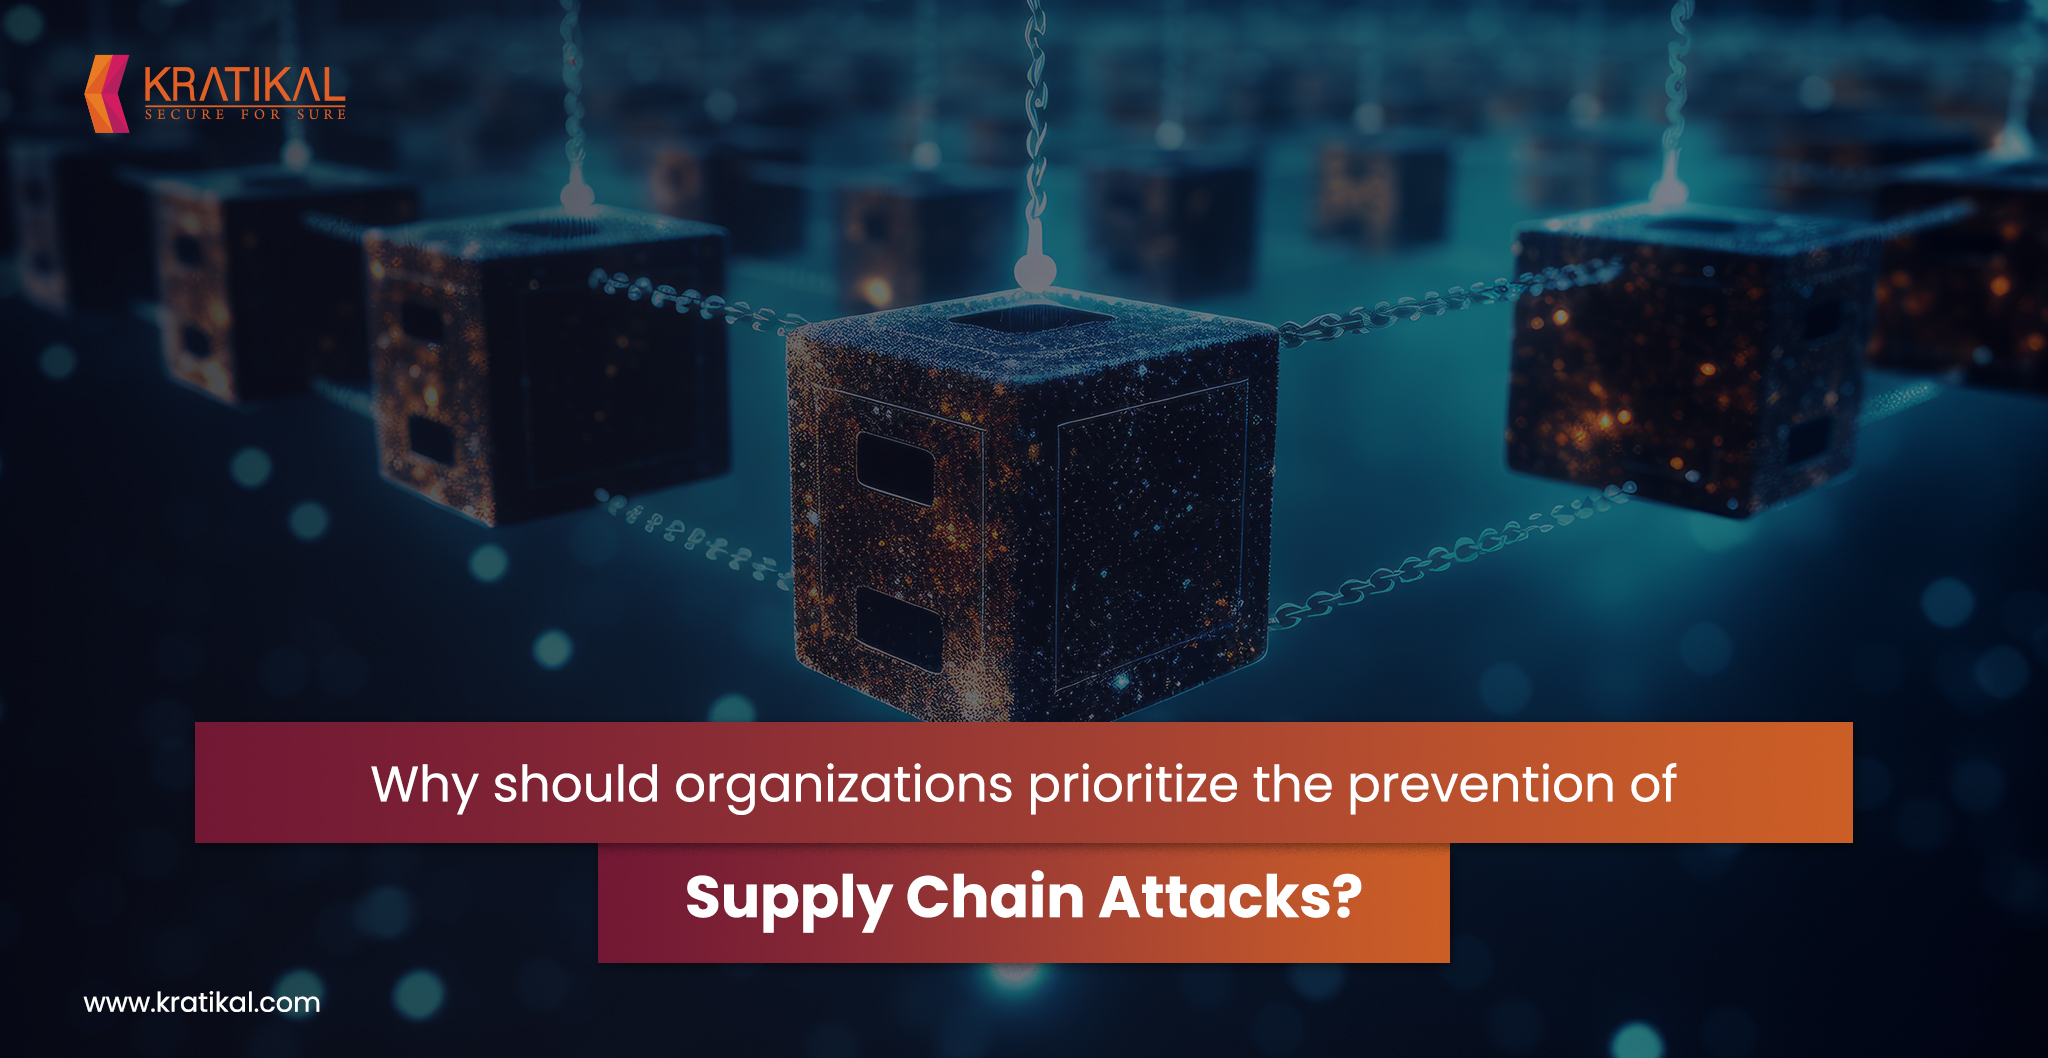 Why is Mitigation of Supply Chain Attacks a Priority for Organizations?